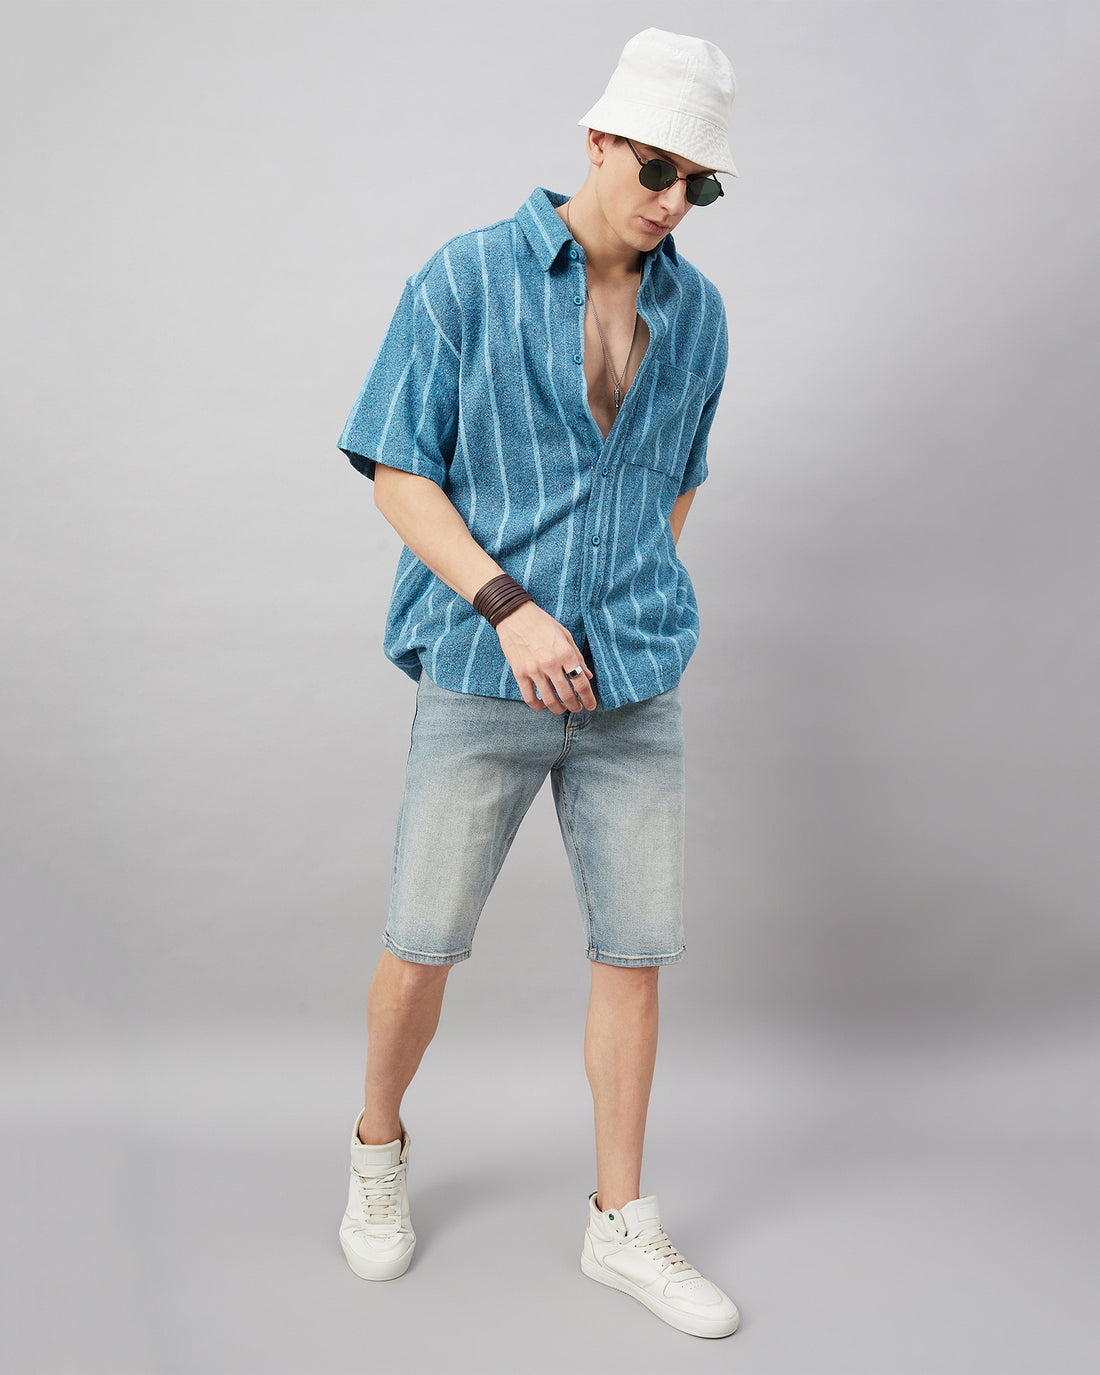 Chimpaaanzee Men Skyblue and White Oversized Fit Shirt